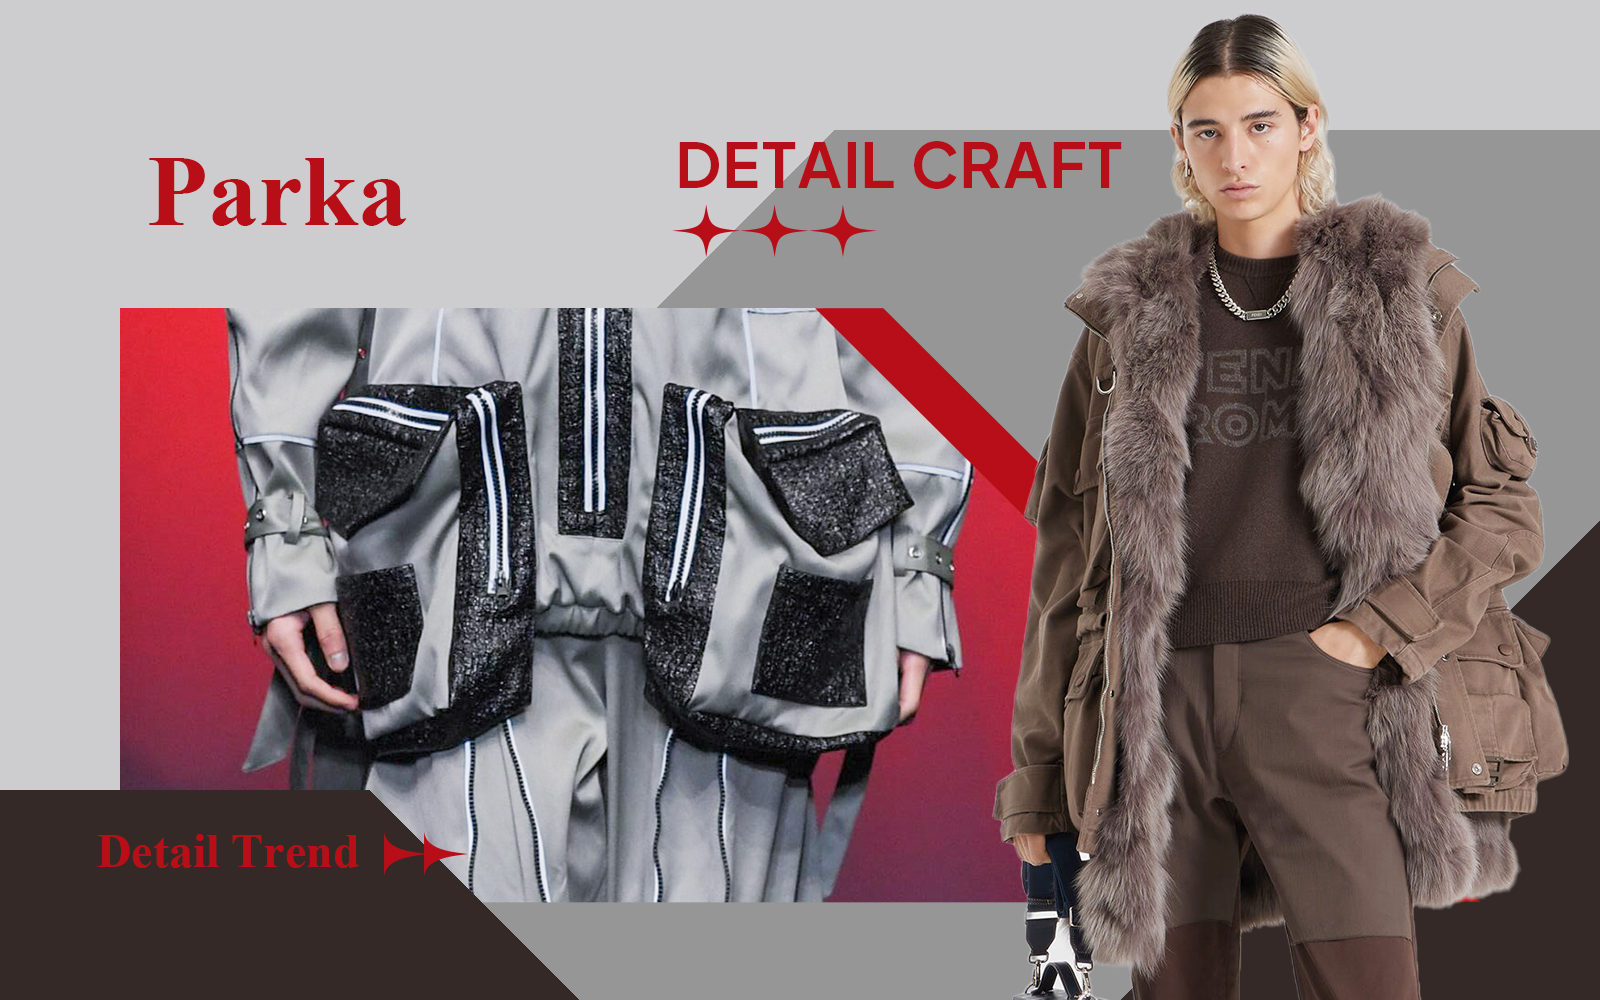 Functionalism -- The Detail & Craft Trend for Parka